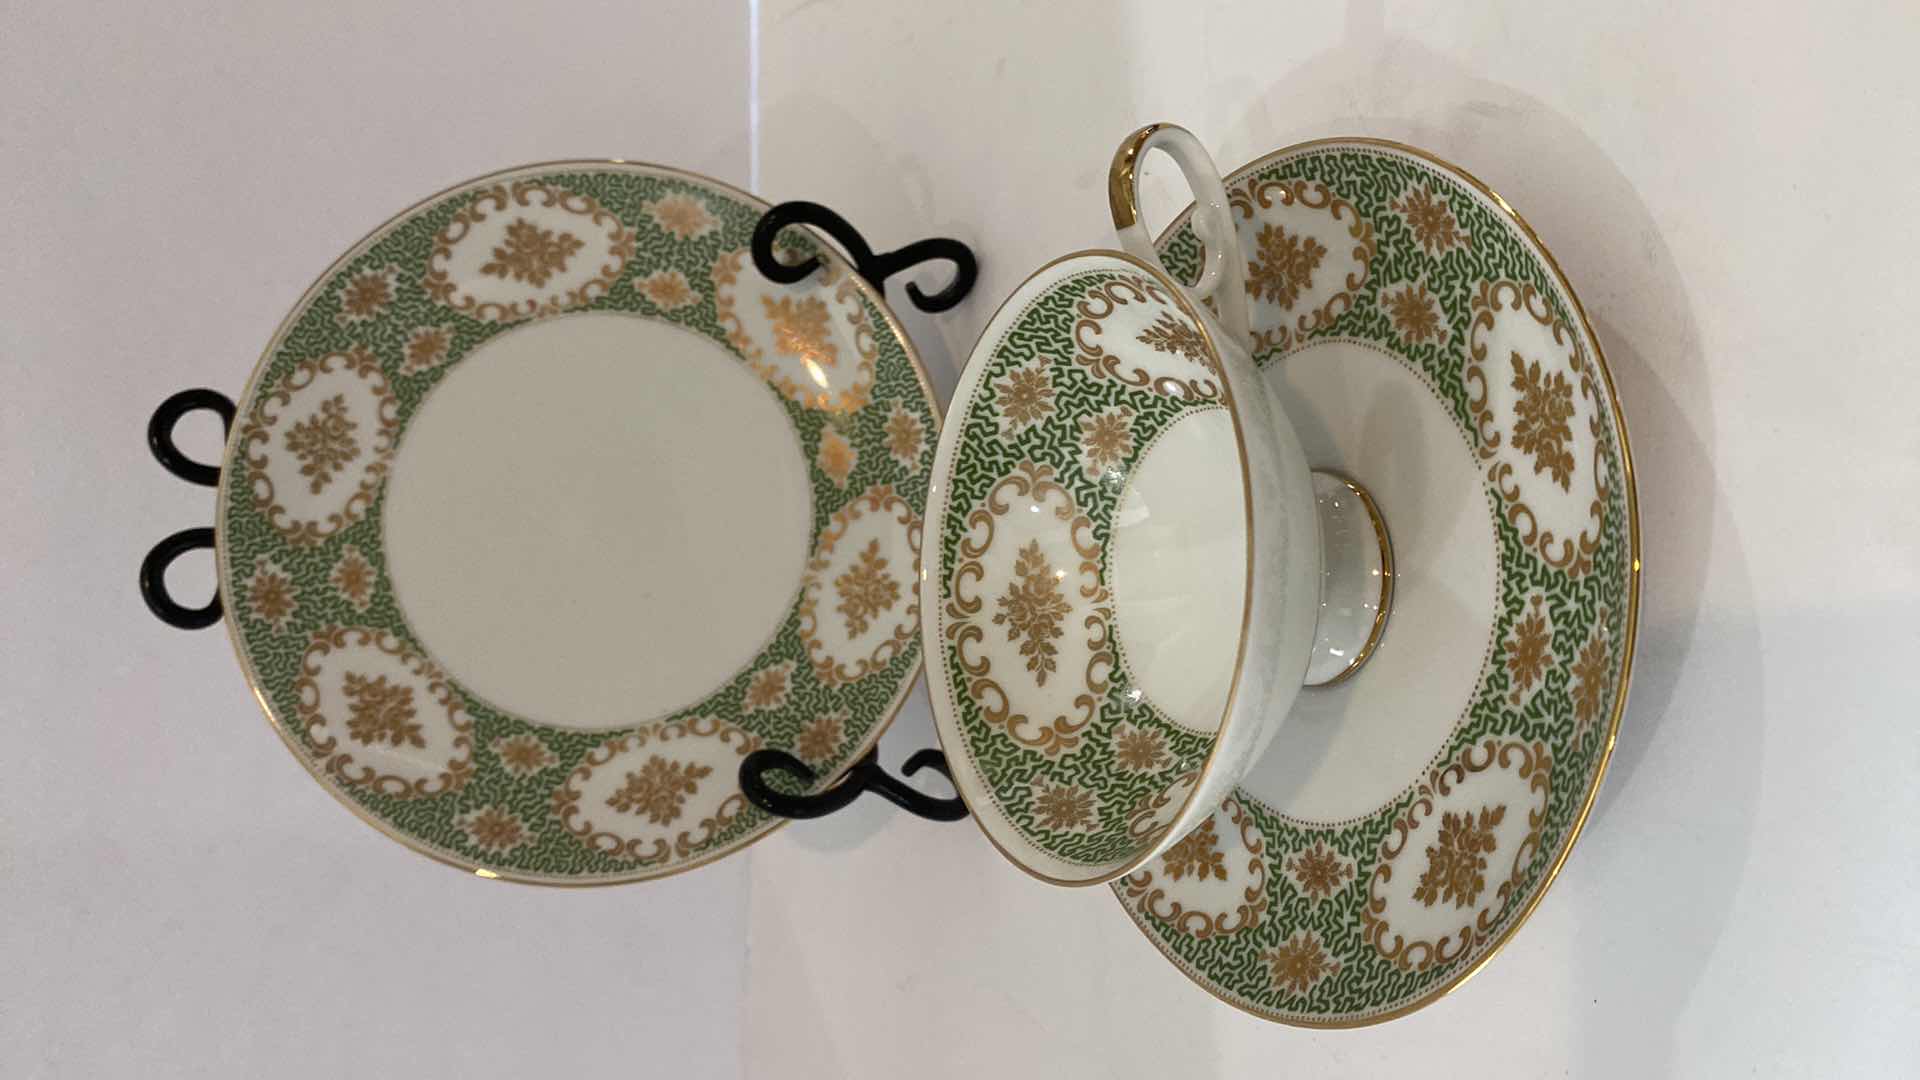 Photo 1 of ALBOTH & KAISER BAVARIA 3 PIECE TEA CUP, SAUCER AND PLATE SET WITH GOLD EDGE